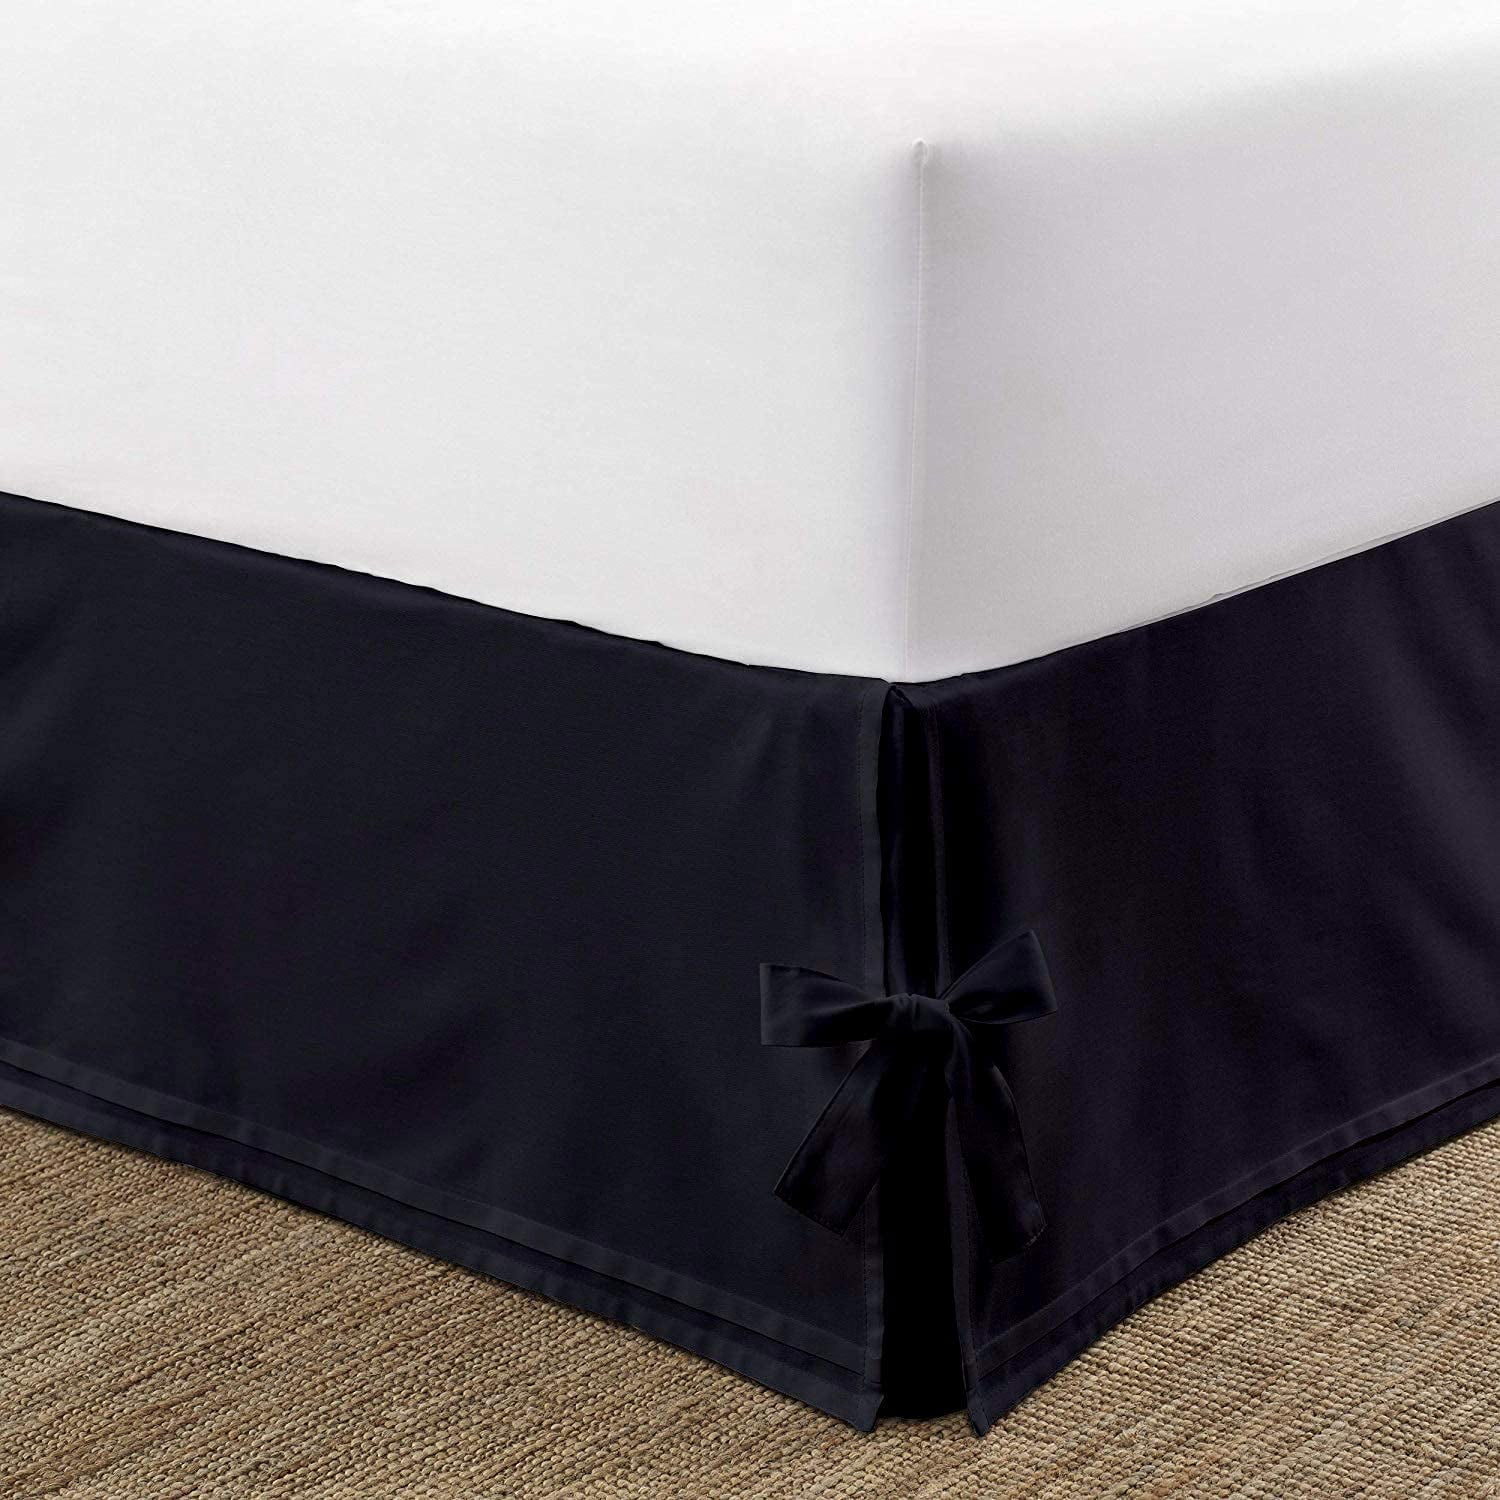 Dust Ruffle Bed Skirt Burgundy with Split Corner Egyptian Cotton with Easy Fit 